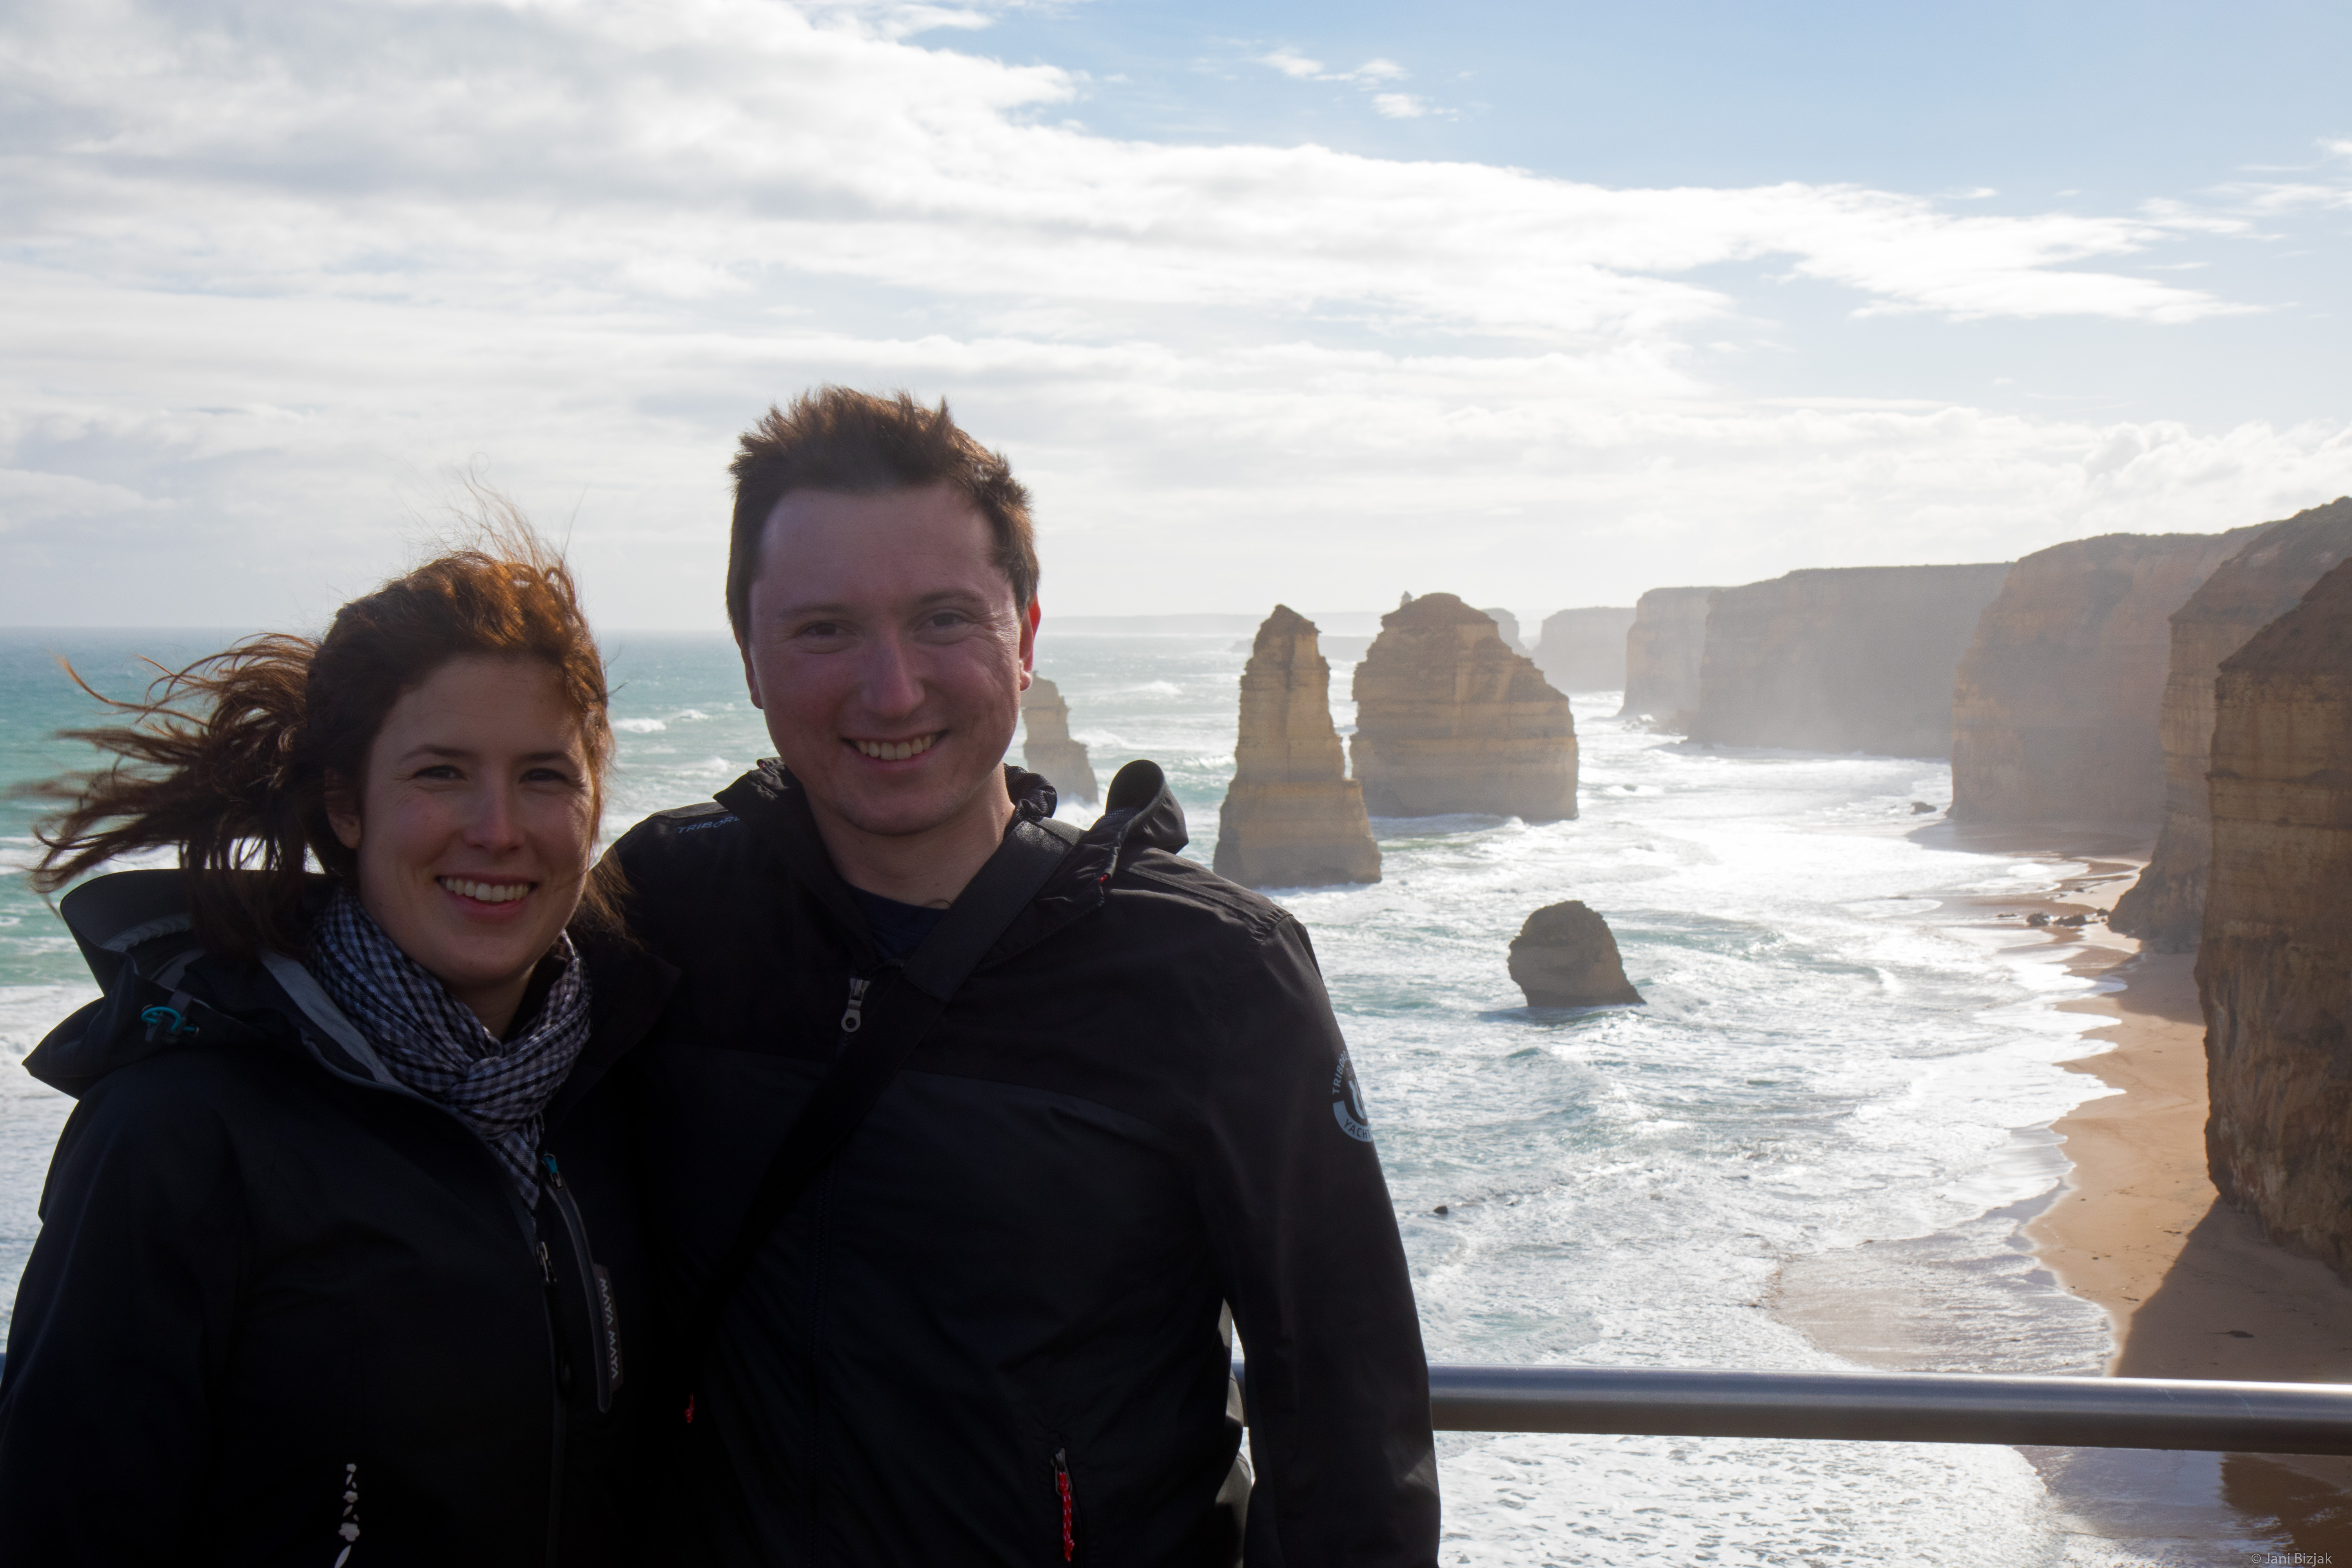 Veronika and I in front of  the cliffs.